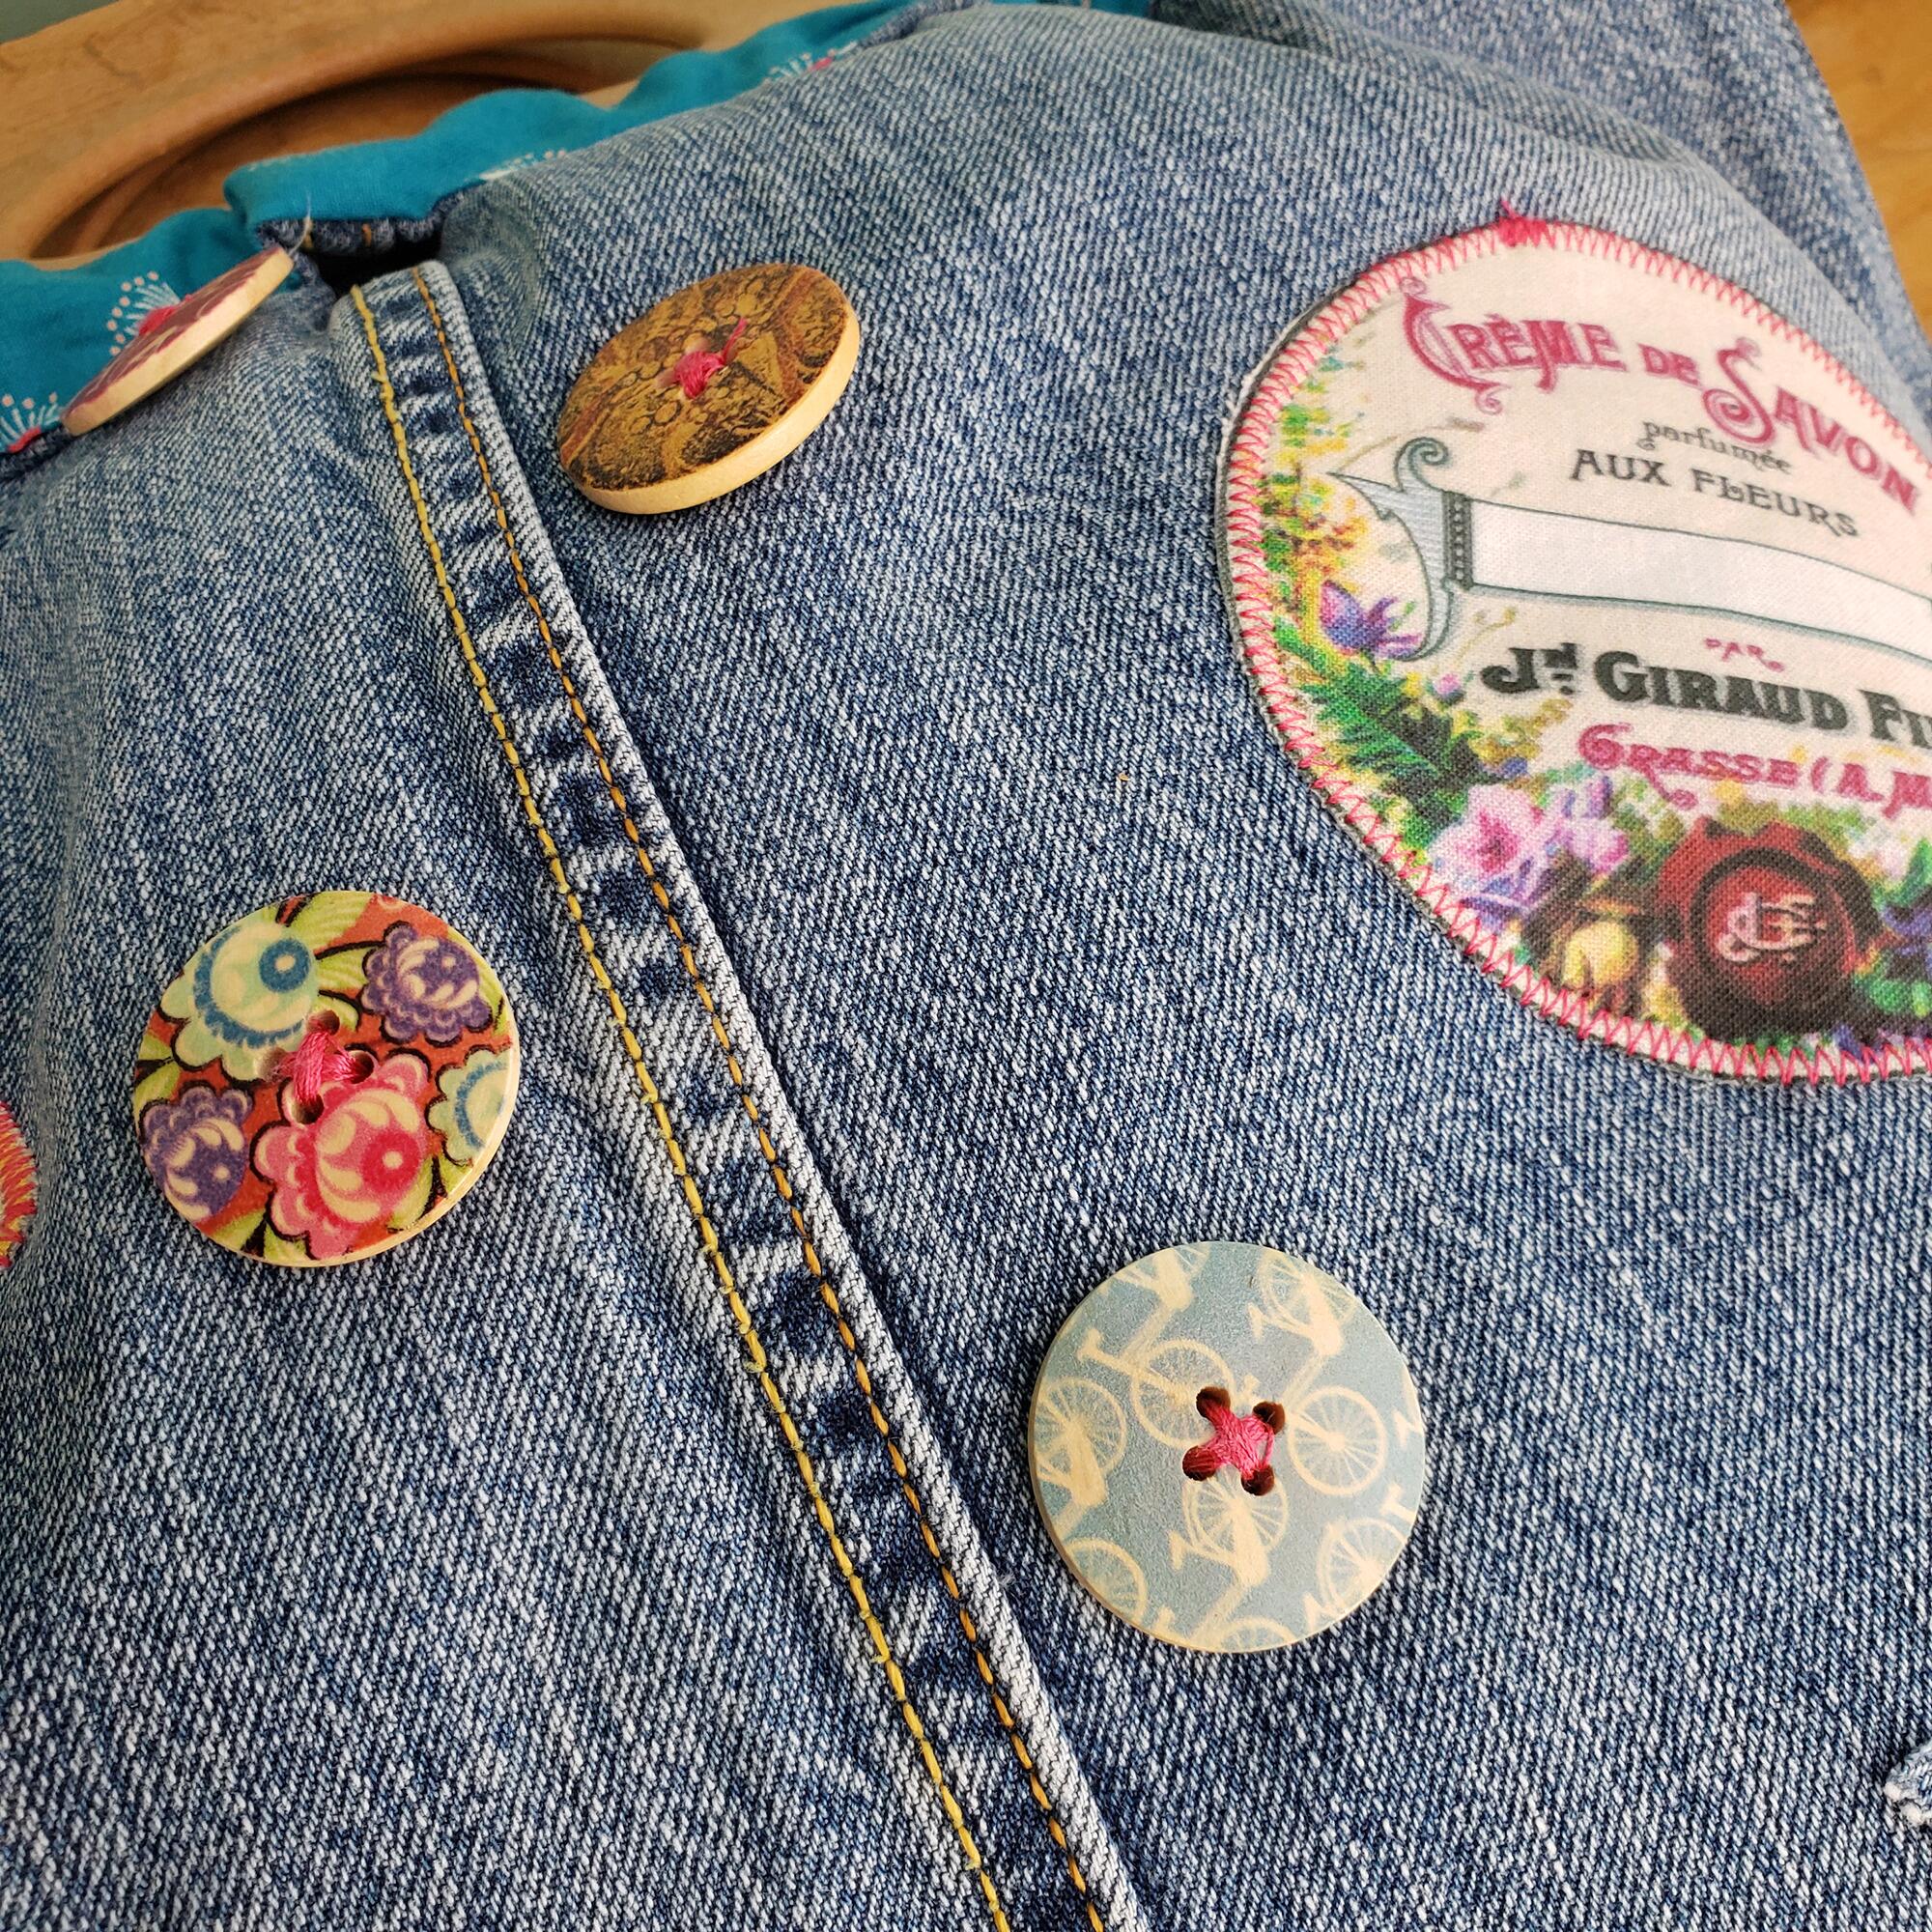 Pair of Pink Flower Patches Iron on Sew on Denim Jeans Flowers